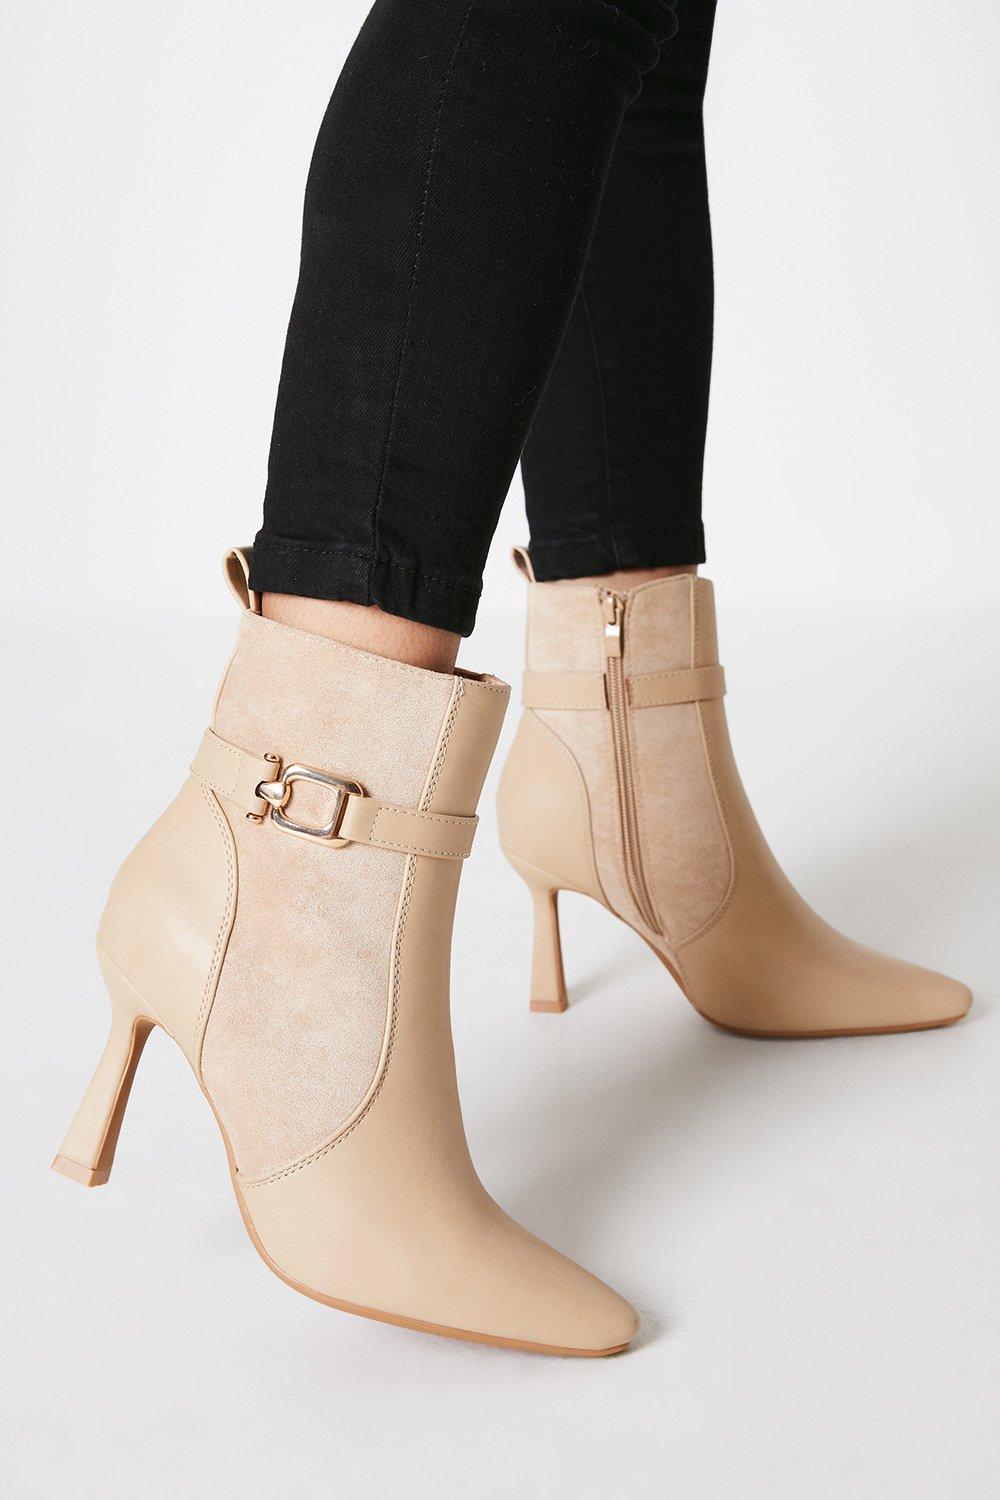 Women’s Faith: Madra Pointed Buckle High Heeled Ankle Boots - beige - 8